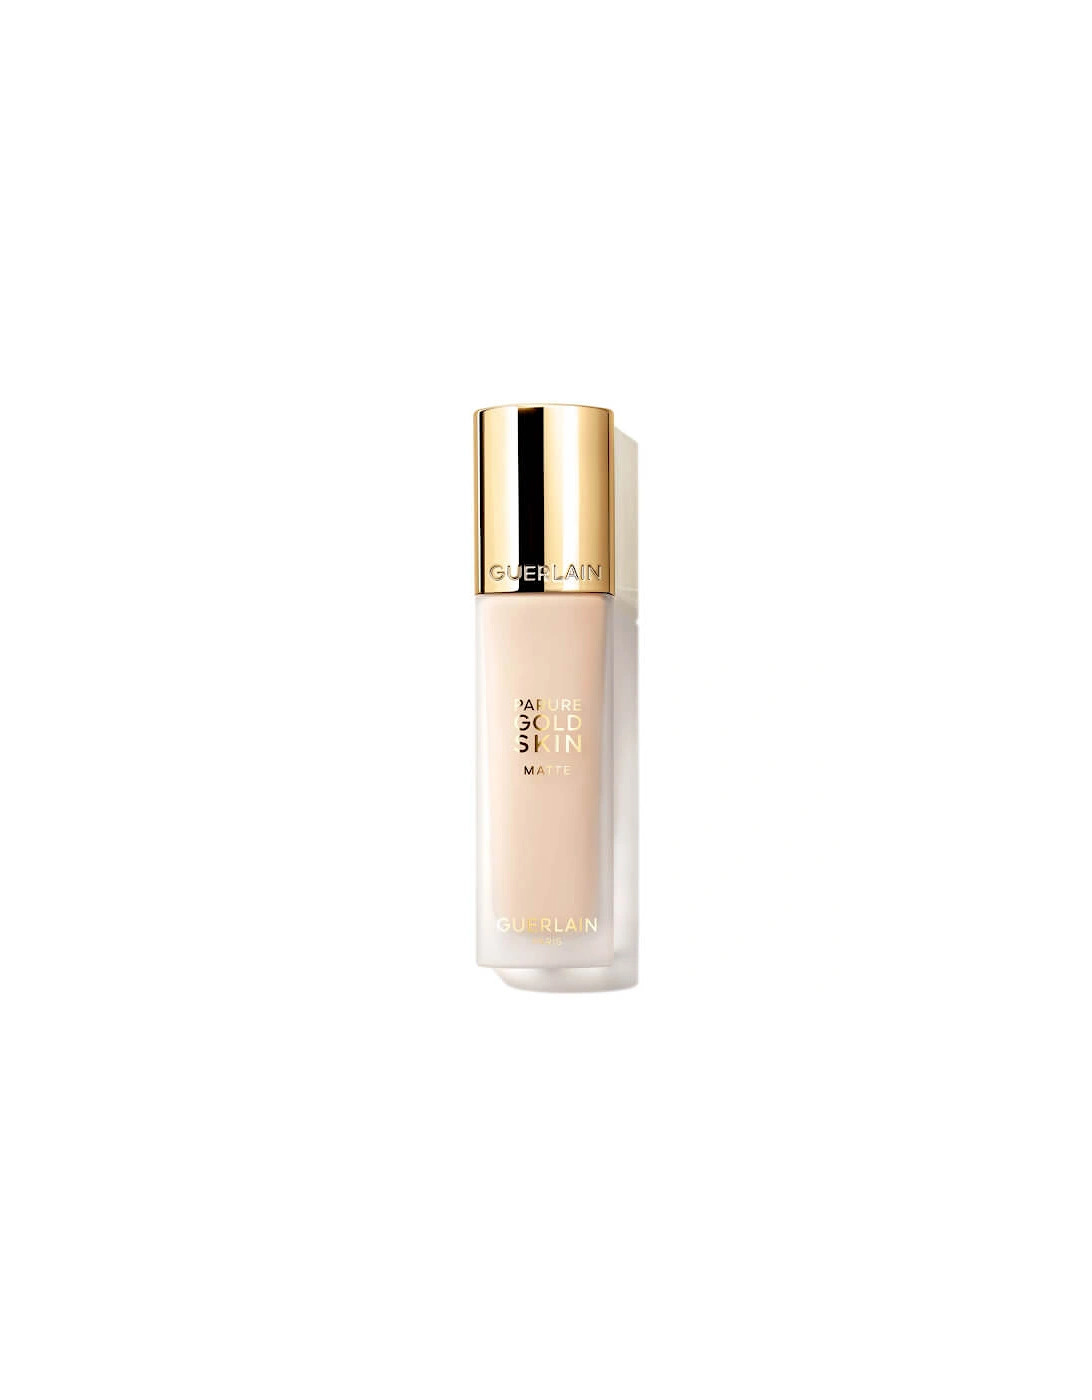 Parure Gold Skin 24H No-Transfer High Perfection Foundation - 0.5N Neutral / Neutre, 2 of 1